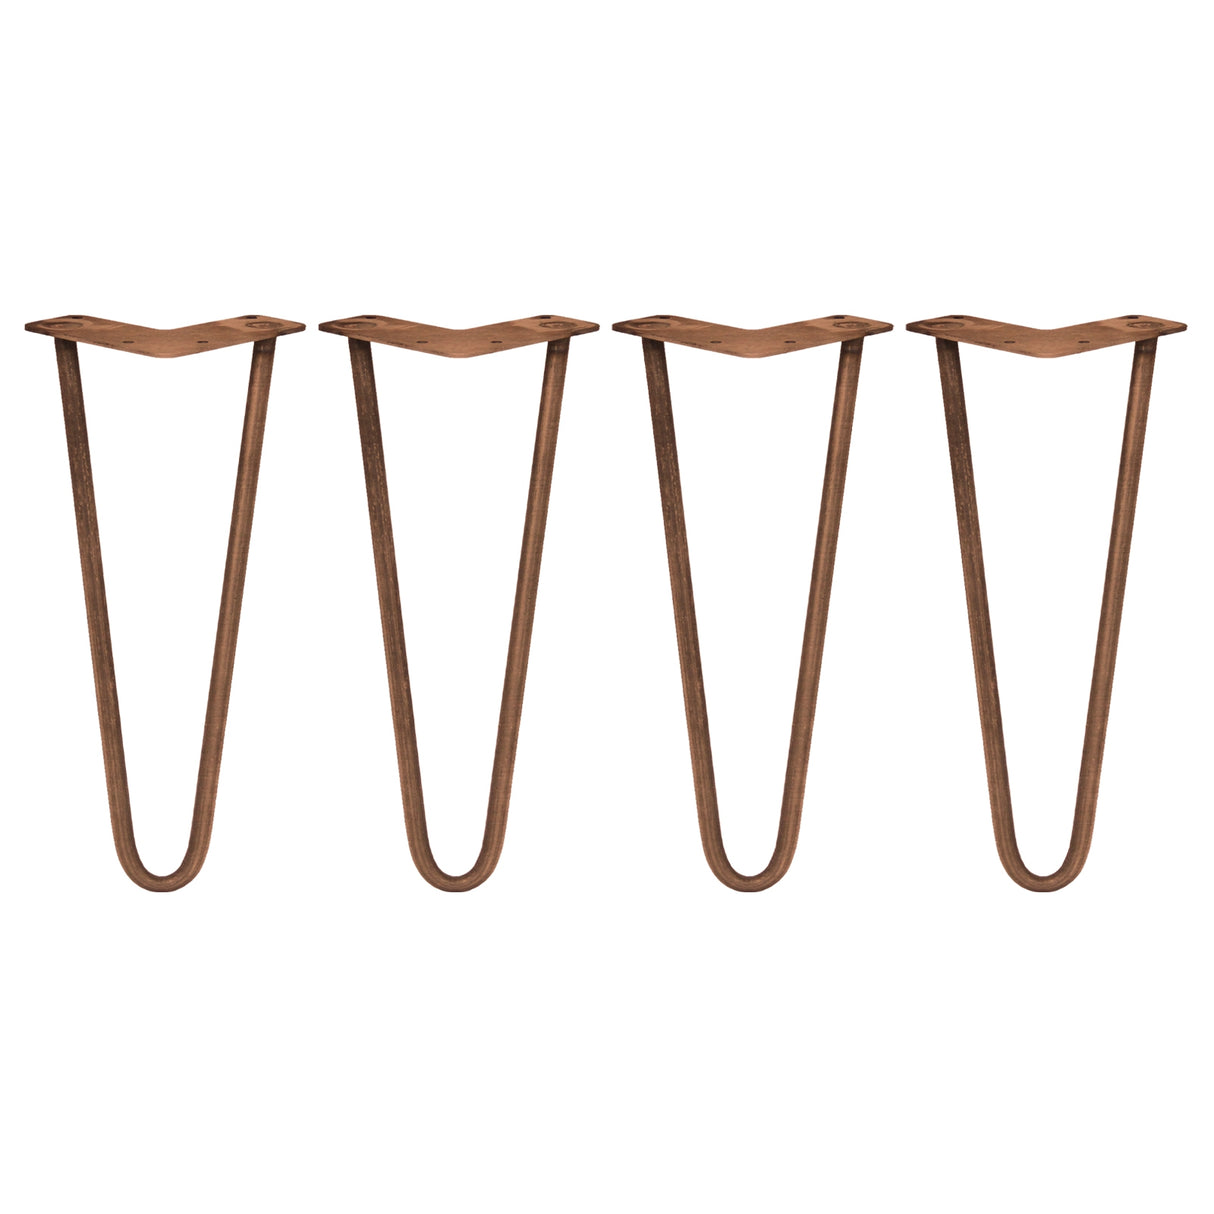 4 x 12" Hairpin Legs - 2 Prong - 12mm - Antique Copper